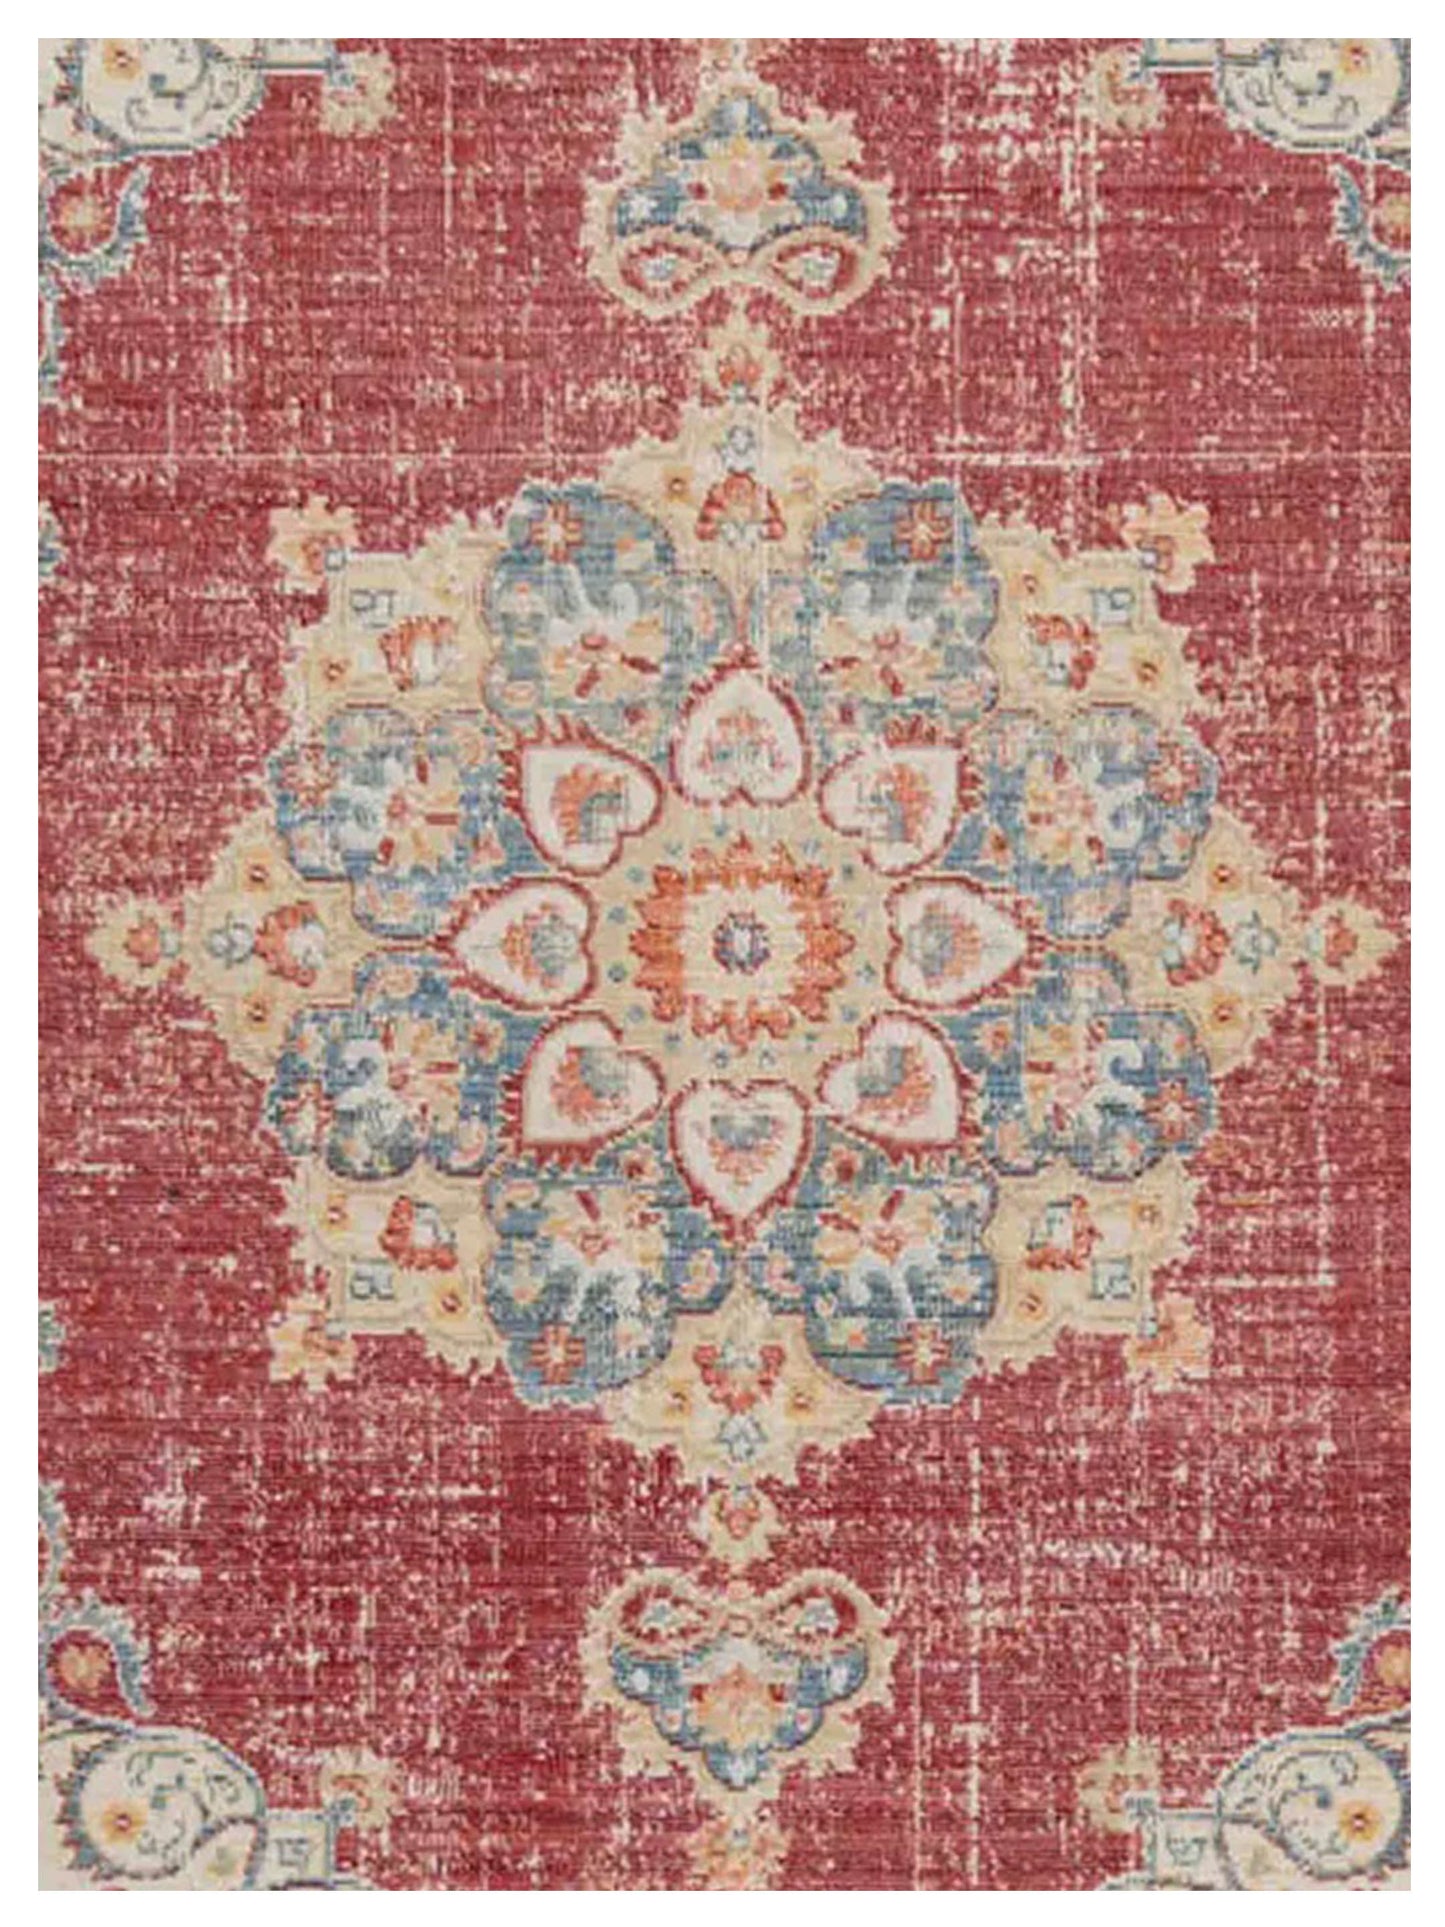 Limited Odeya OR-807 BURGUNDY RED TEAL Traditional Machinemade Rug